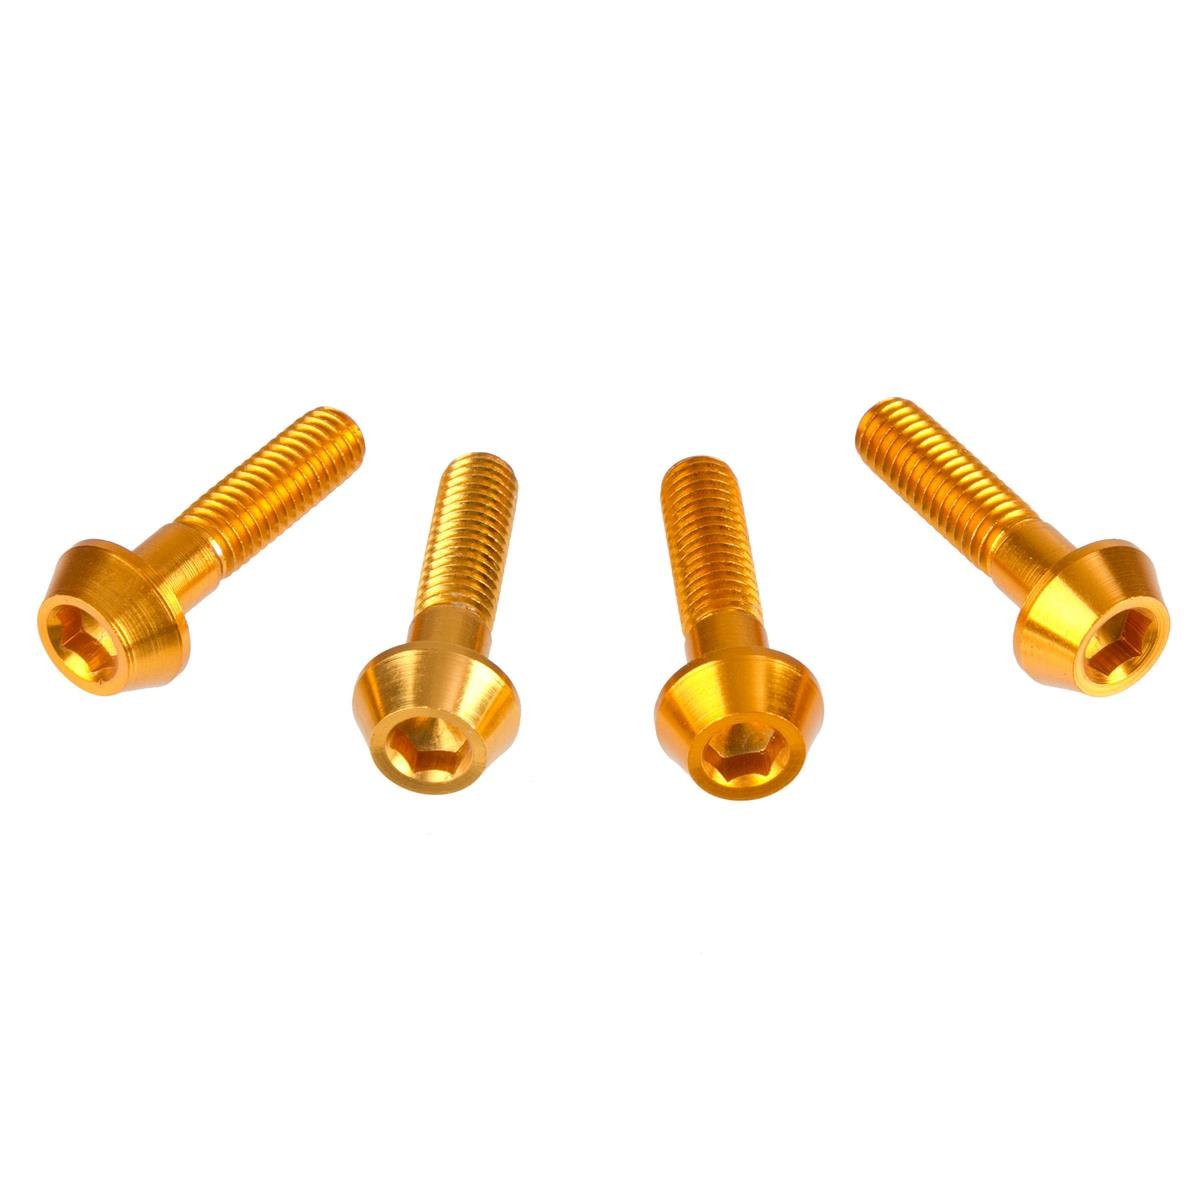 DRC Inner Hex Bolts  M6 x 25 mm, Gold, Pack of 4